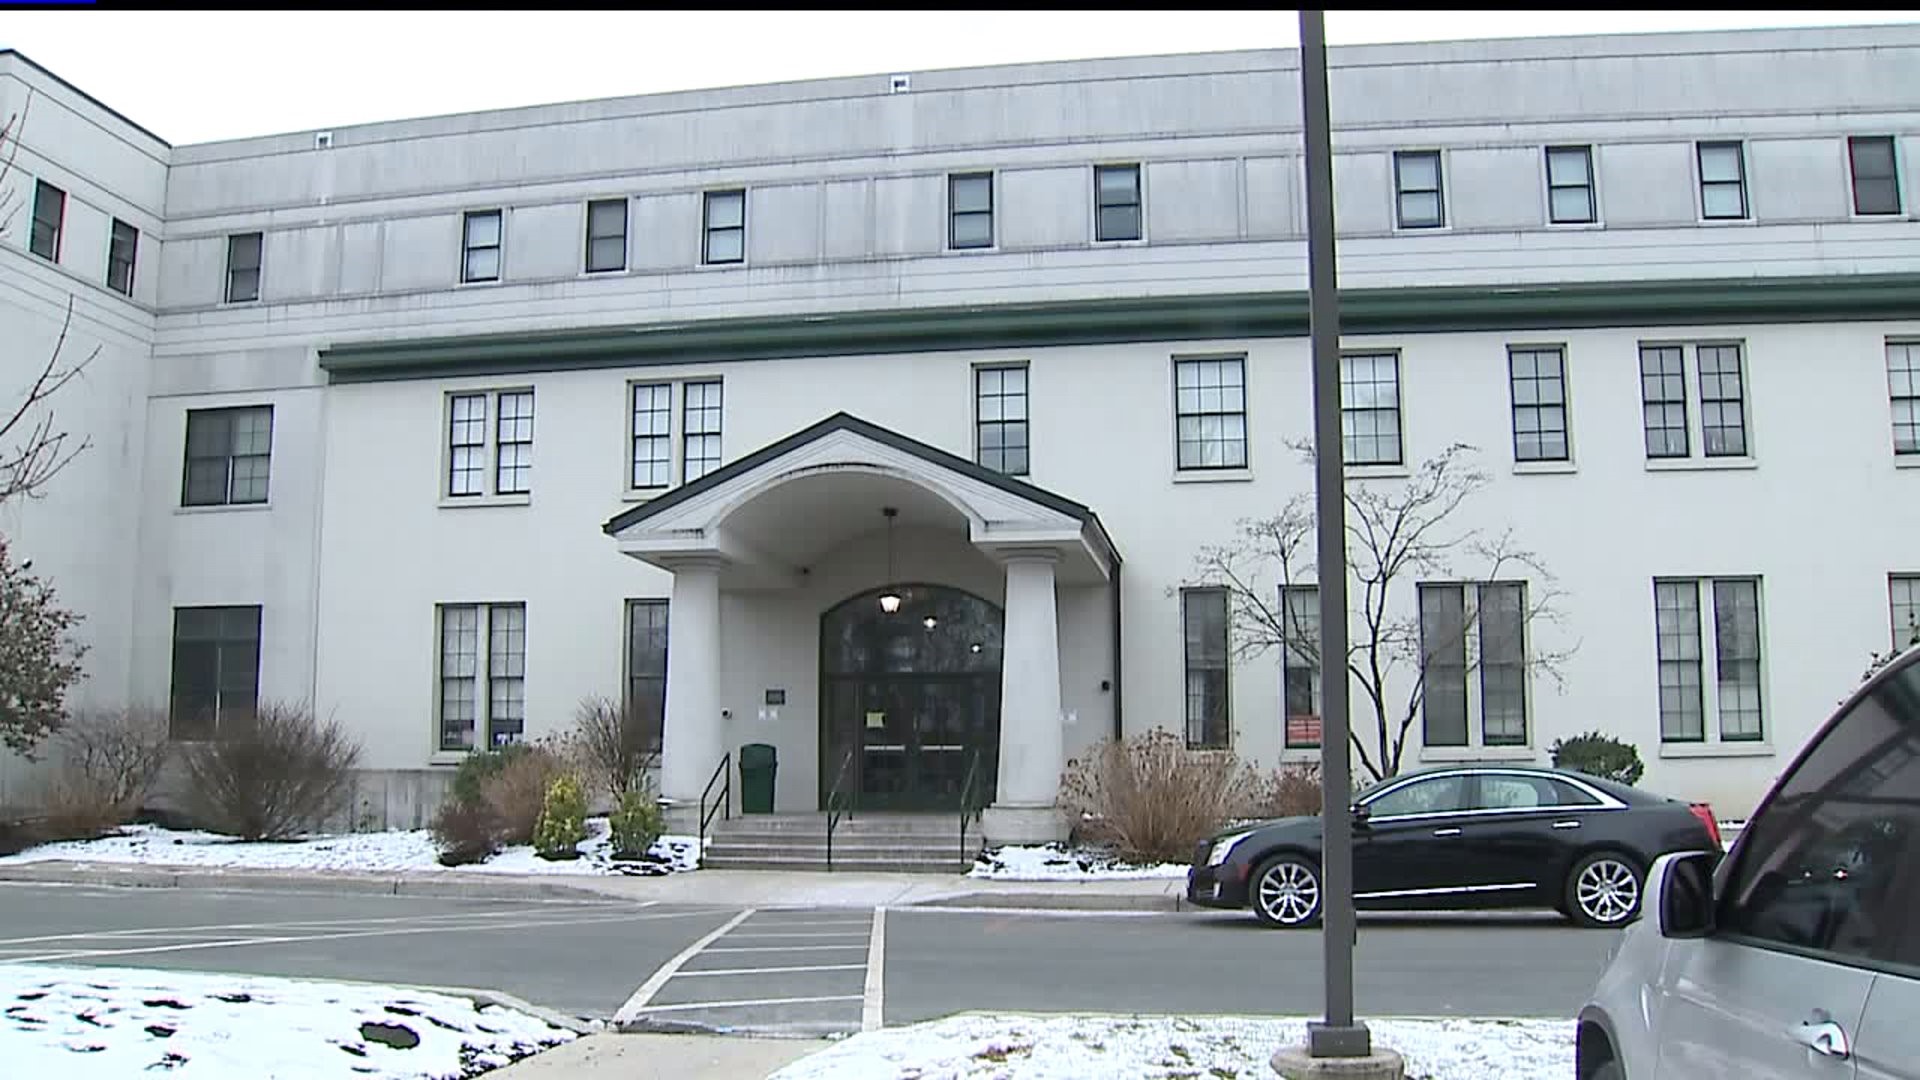 Partial government shutdown impacts local shelter